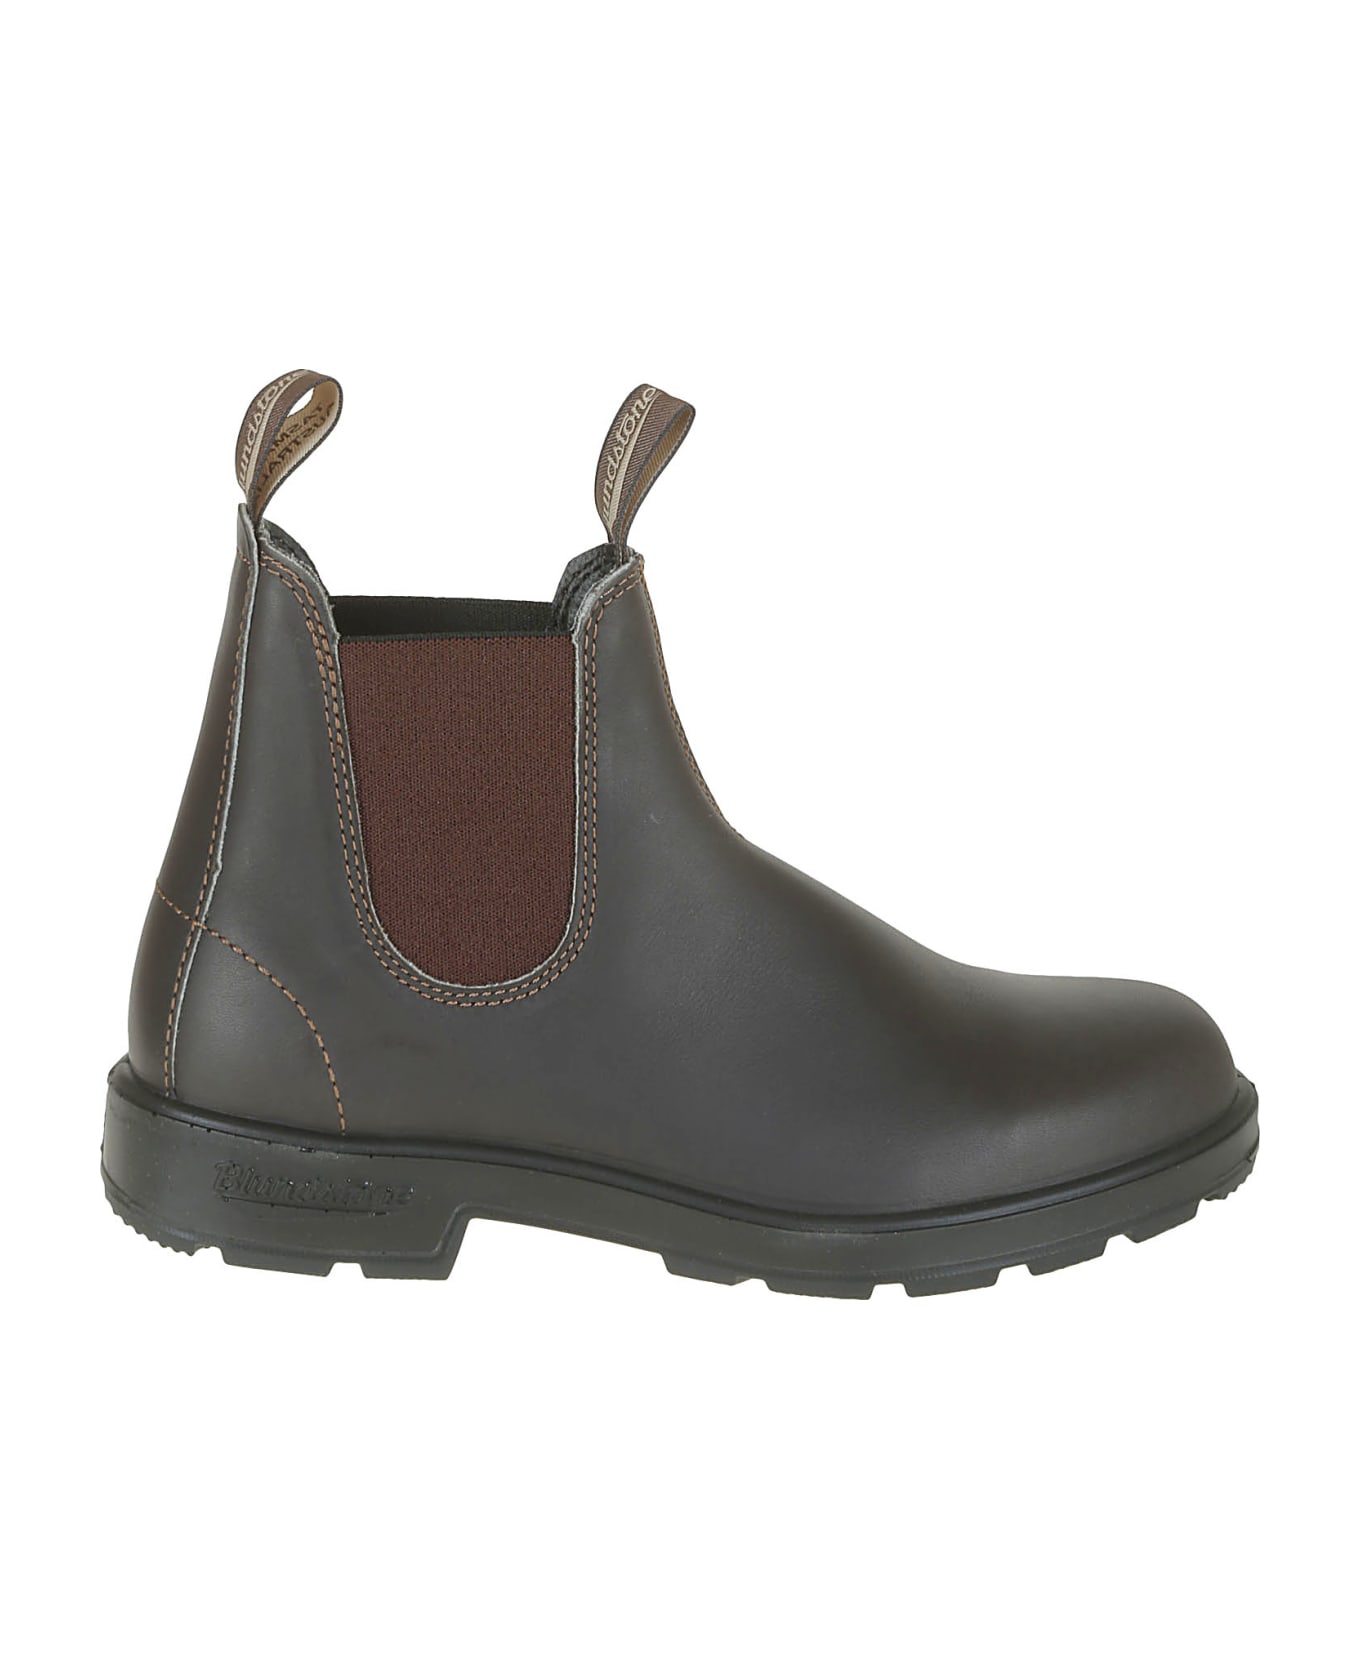 Blundstone 500 Stout Brown Leather - Stout Brown & Brown